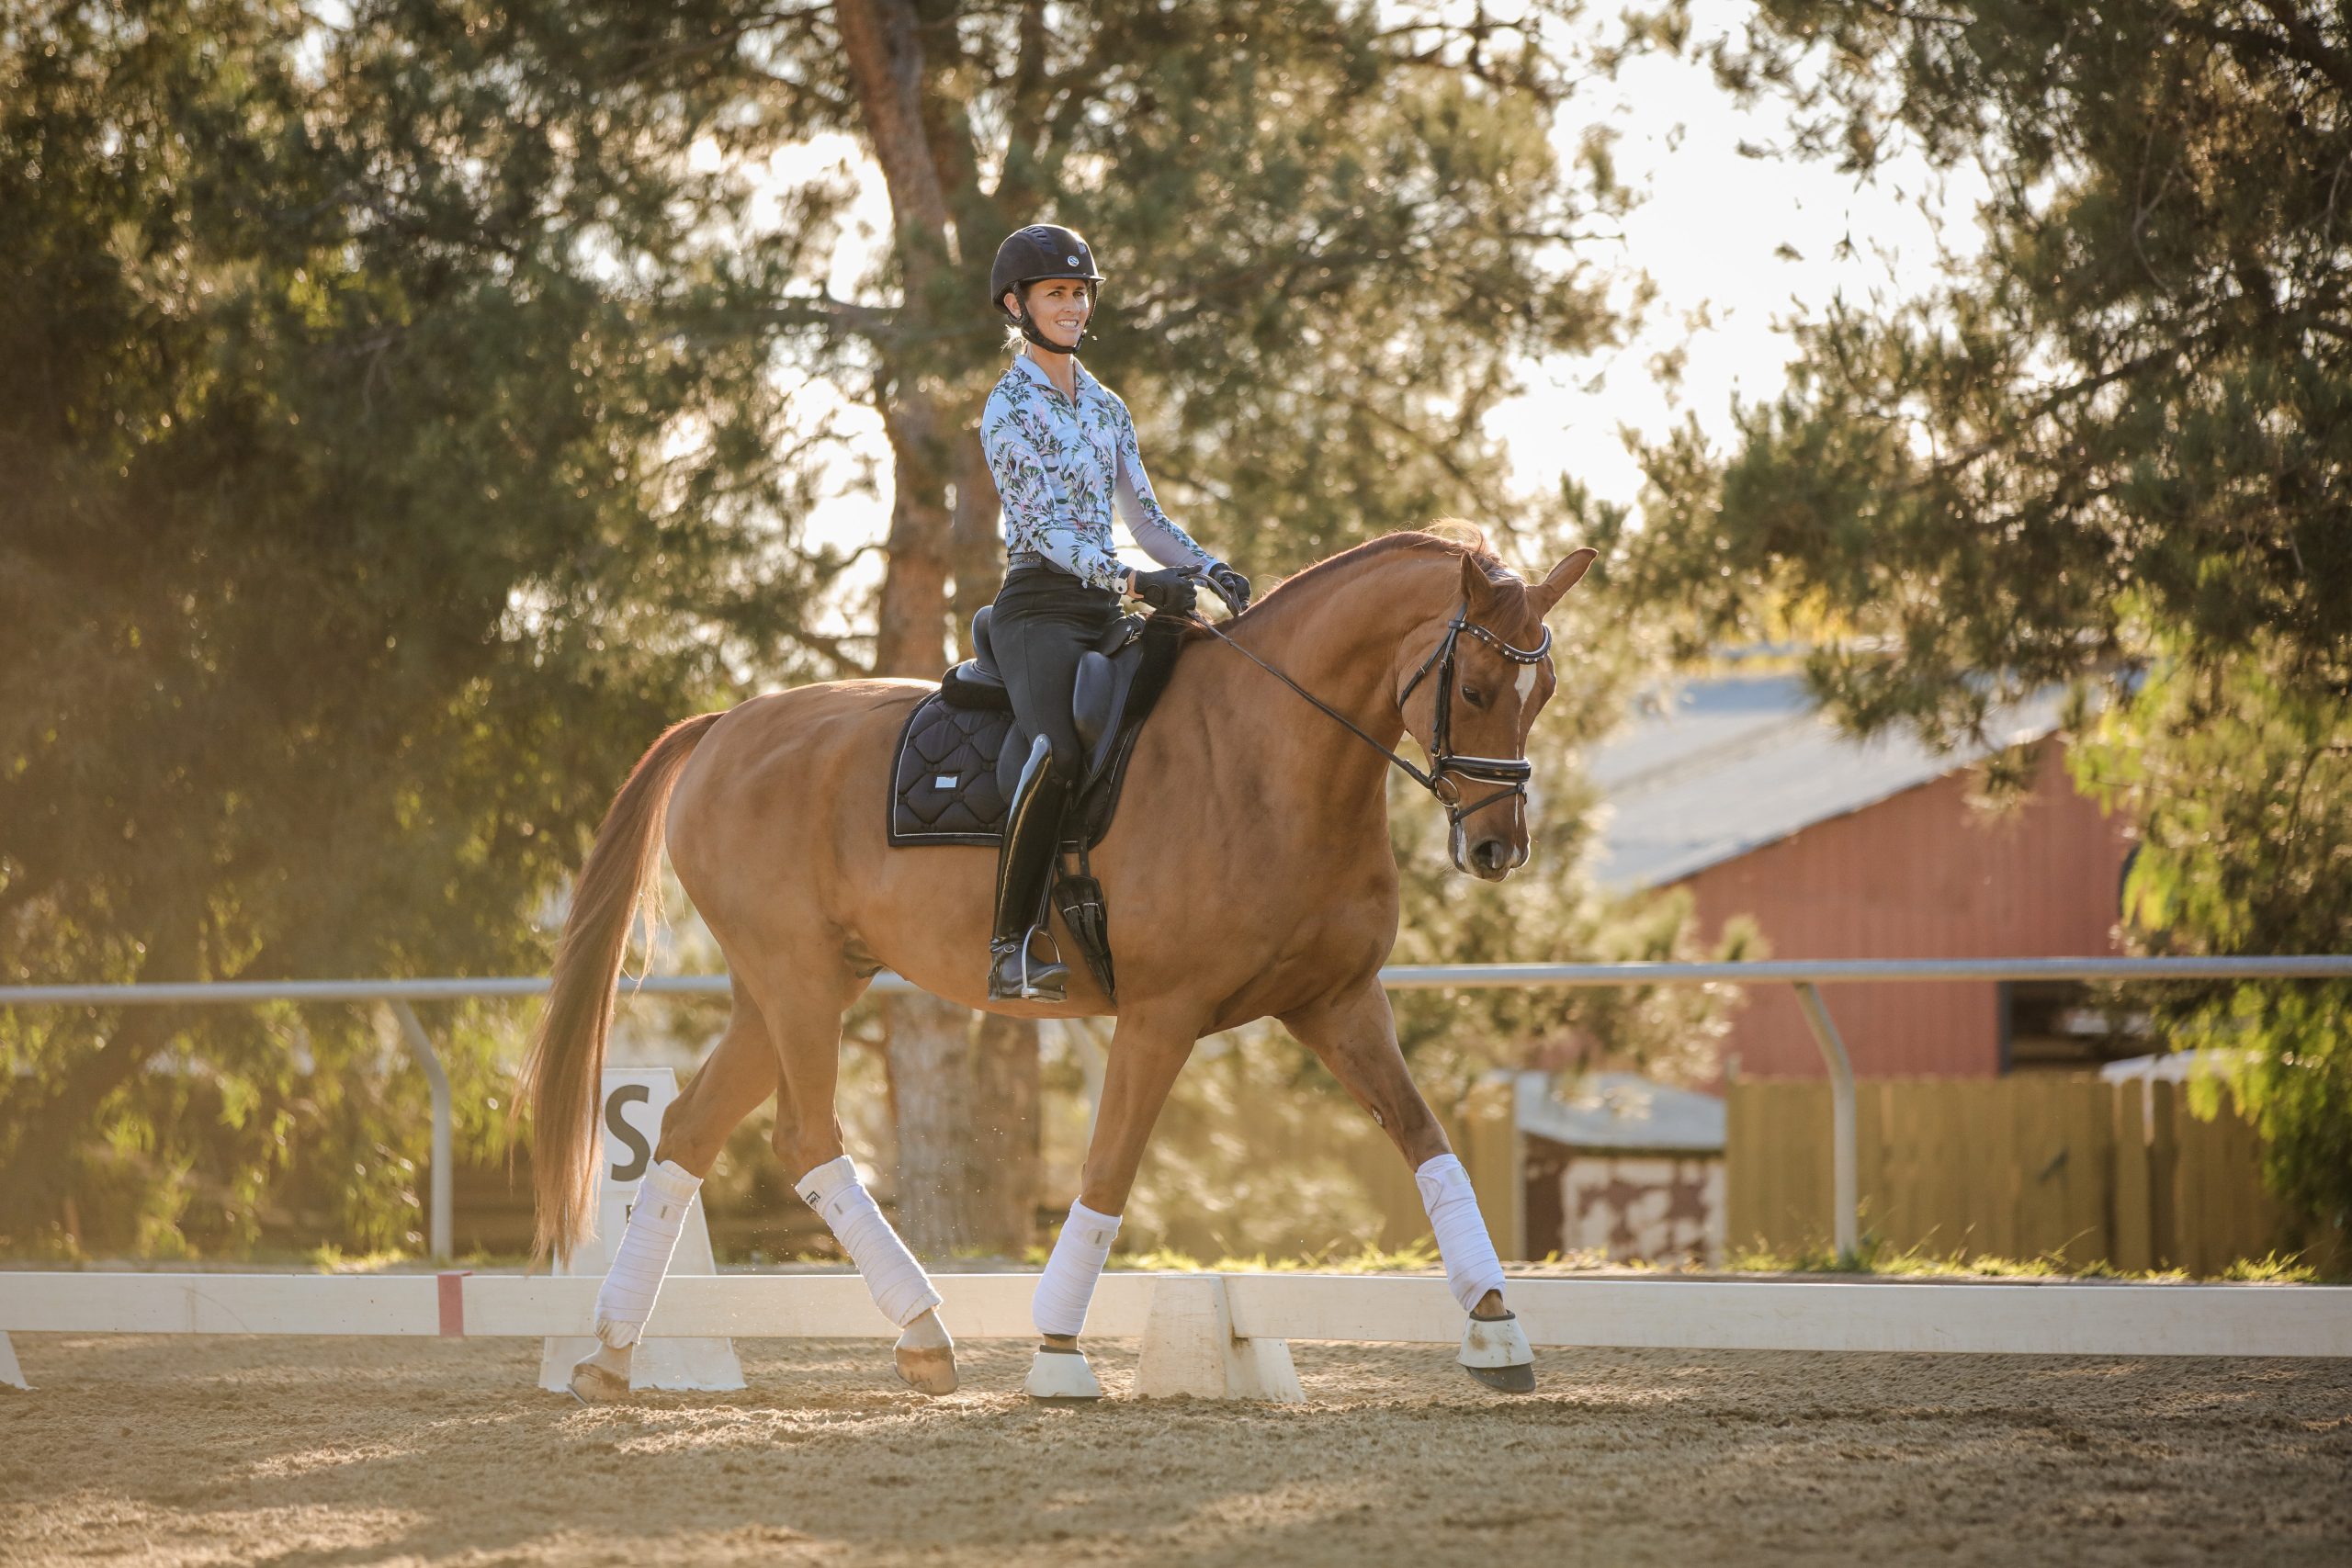 Amelia Newcomb riding a balanced trot on a chestnut dressage horse.